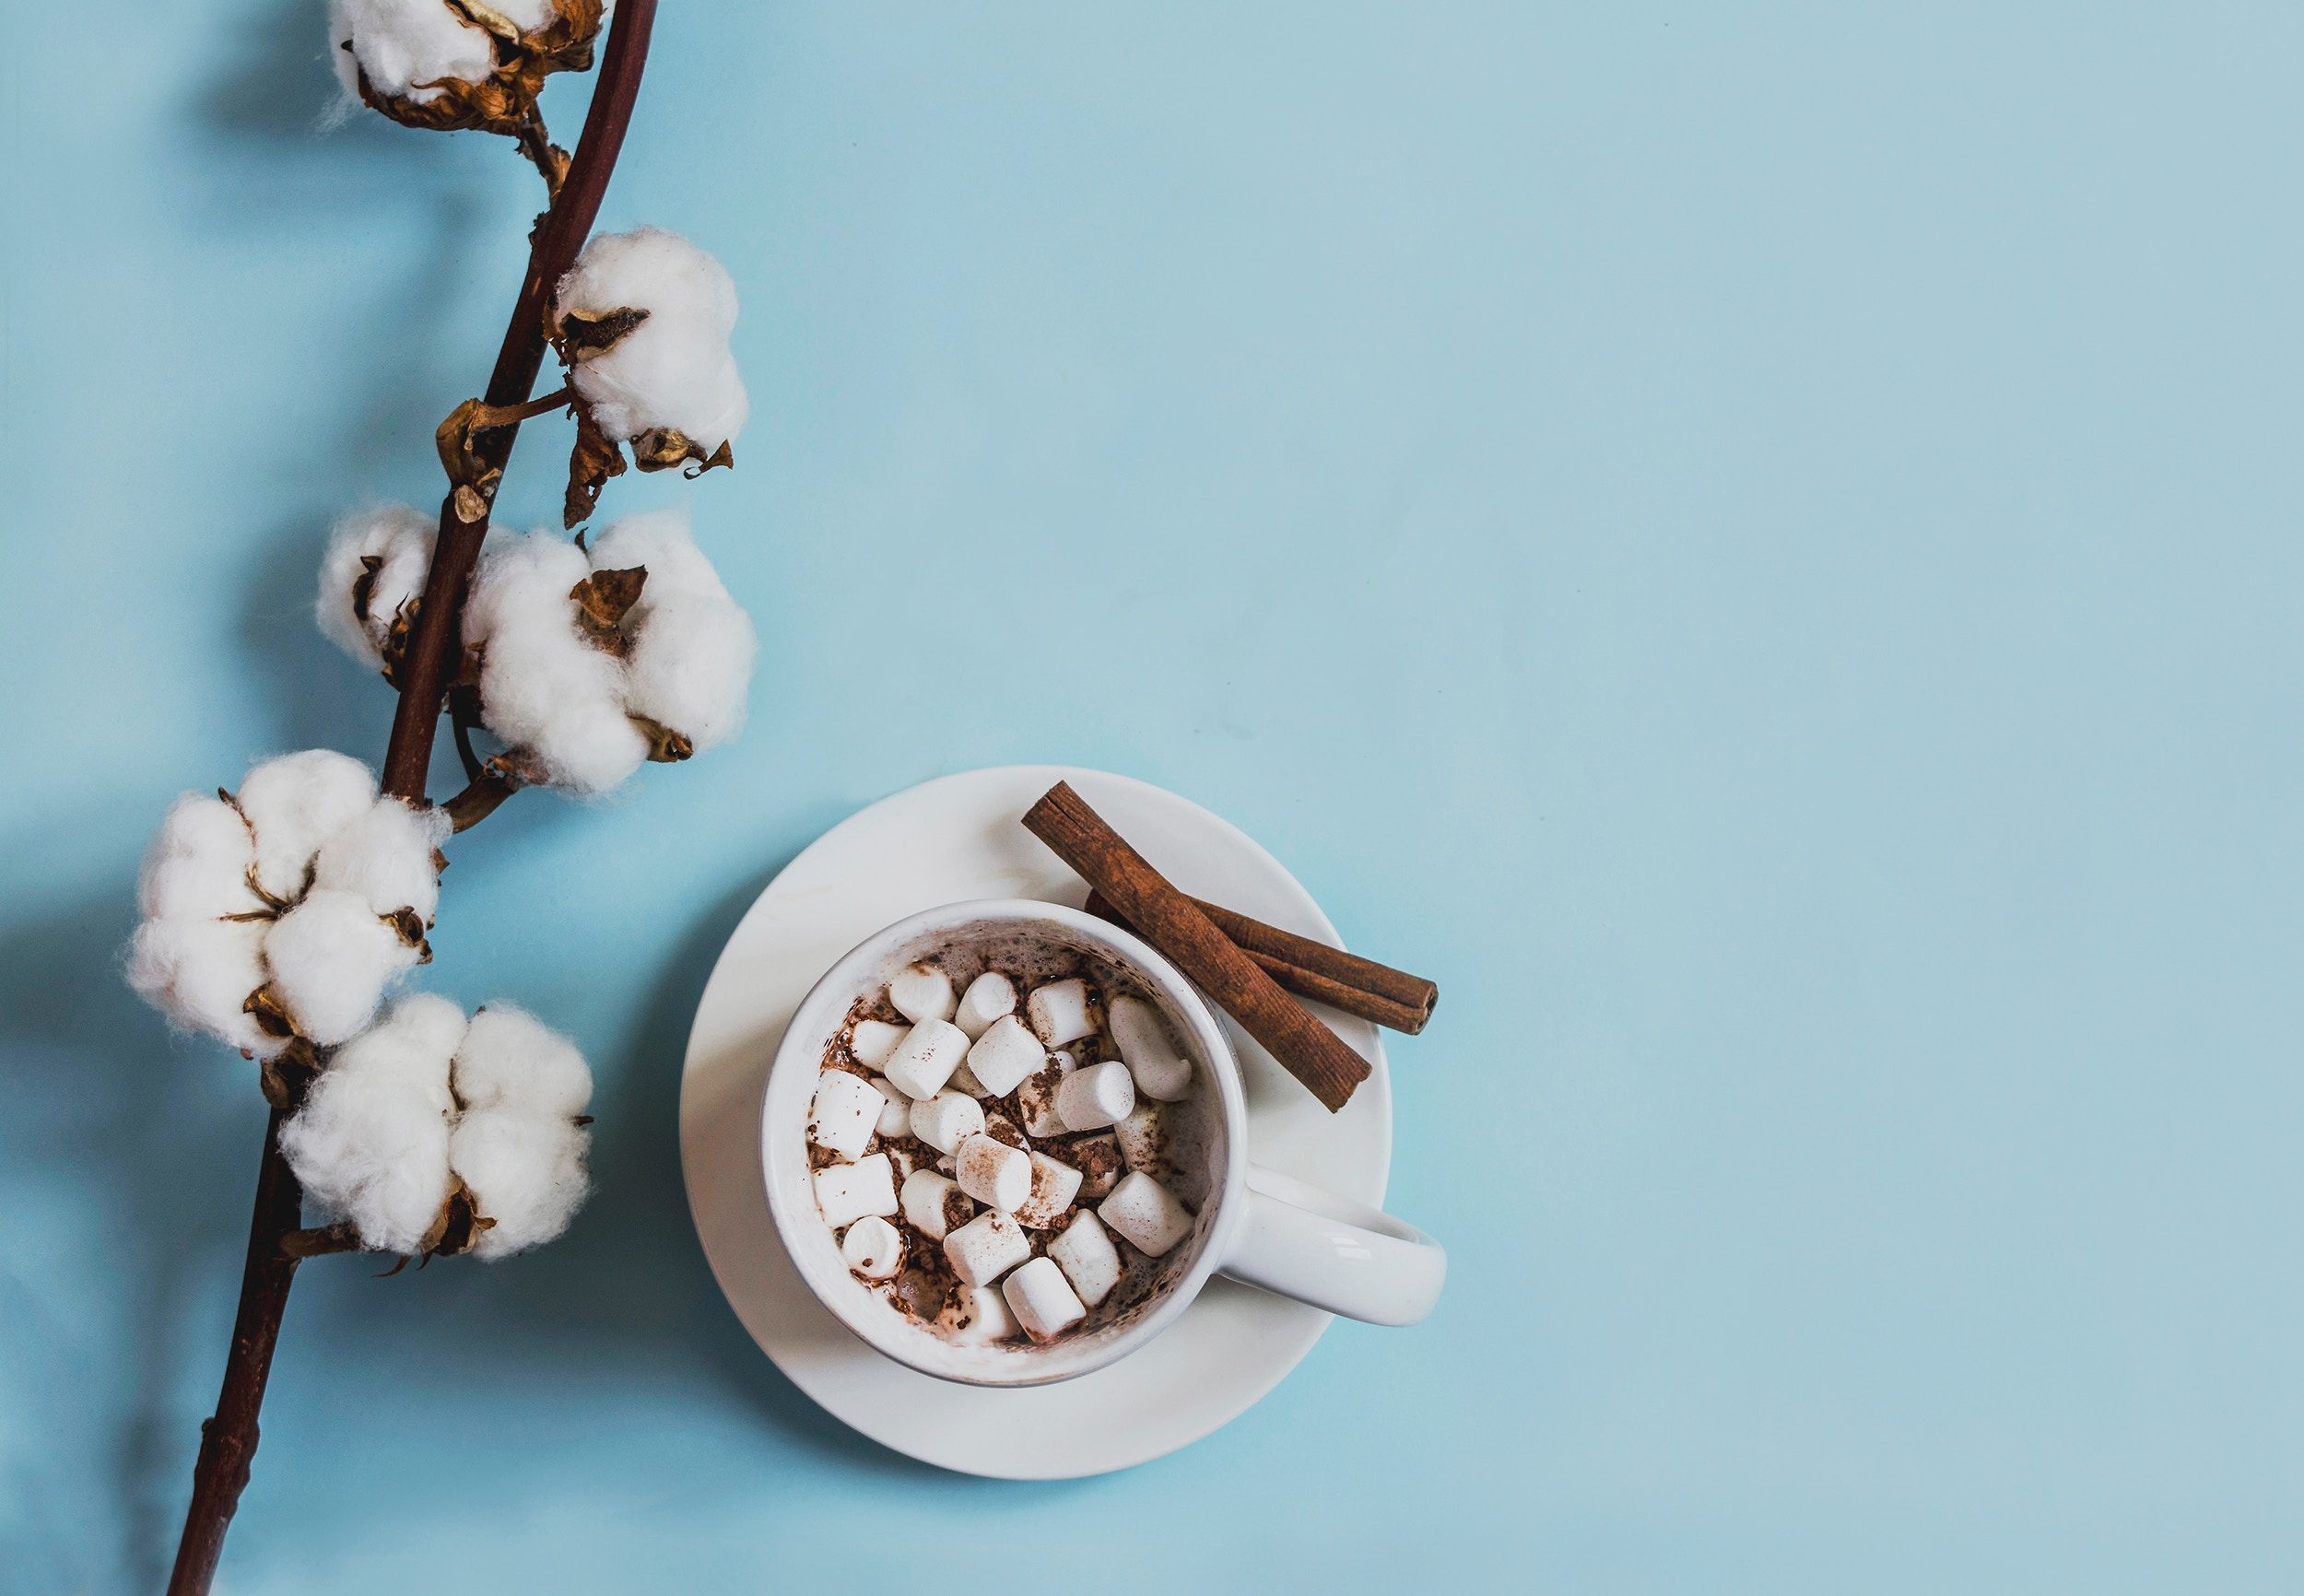 2500x1732 #spring, #marshmallow, #drink, #mallow, #cup, #plant, #coffe, #cup and saucer, #minimal, #cinnamon sticks, #cotton, #coffee, #lay flat, #blue background, #hot chocolate, #twig, #natural, #Free image